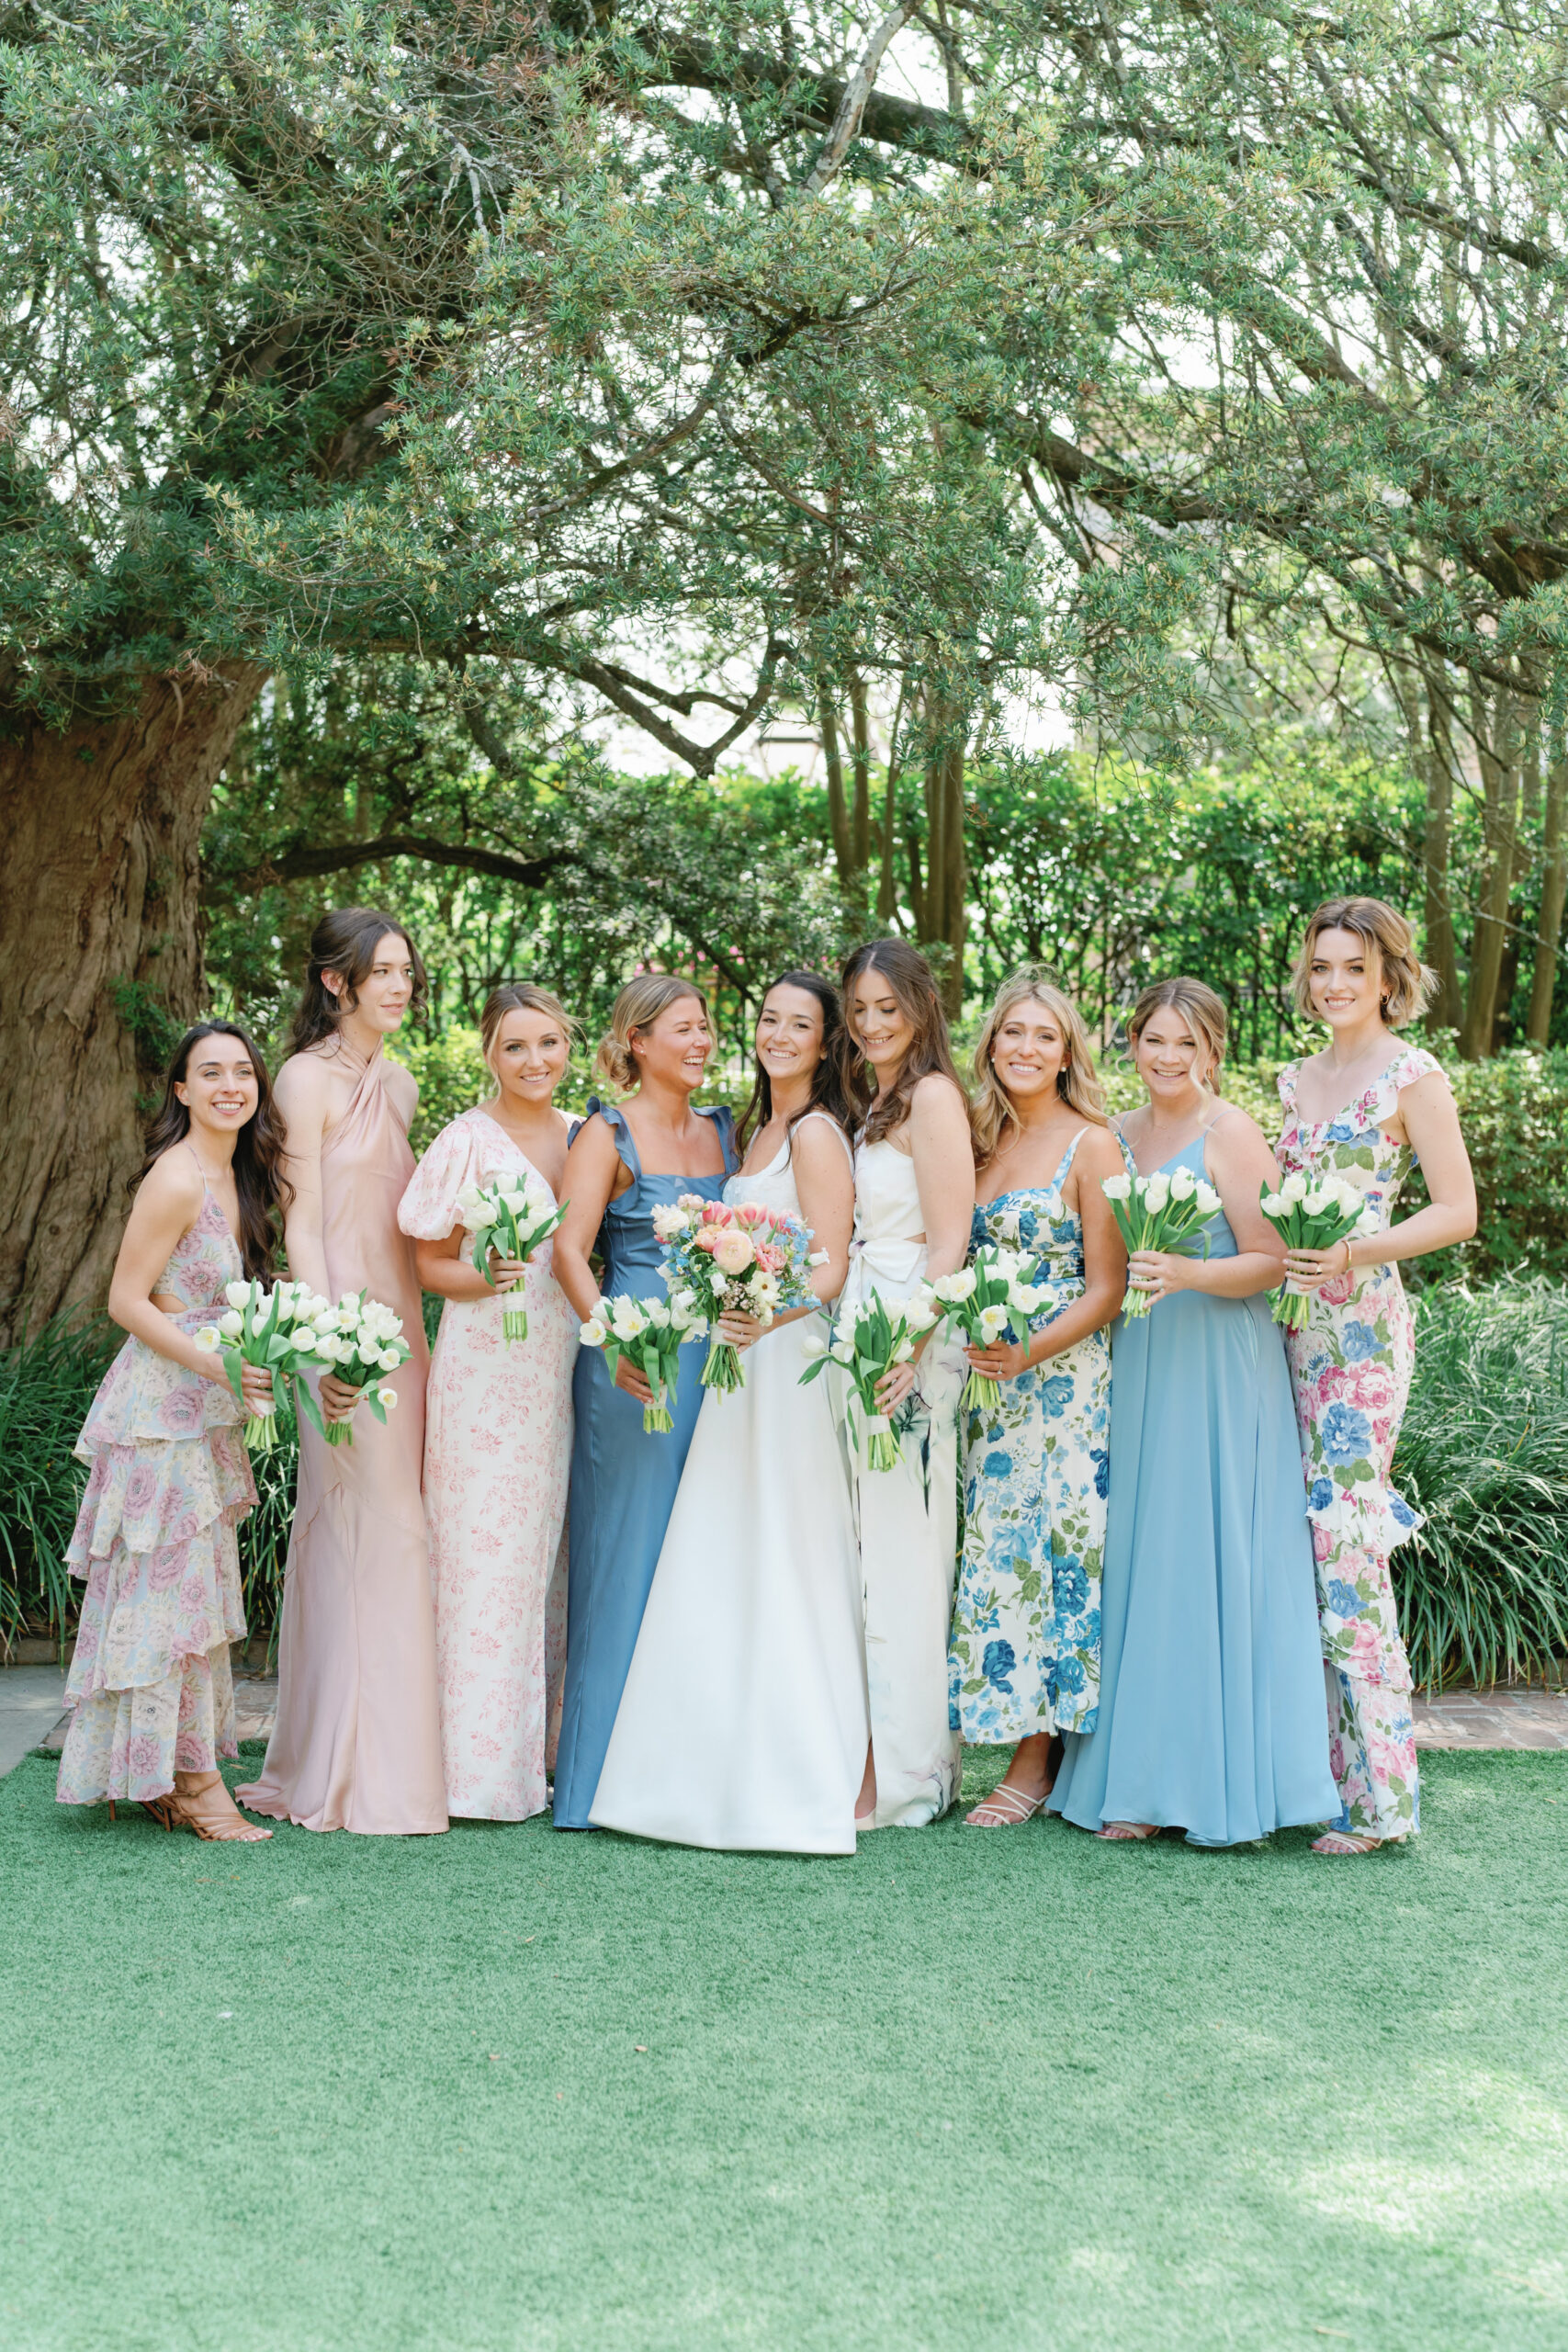 Bride laughing with bridesmaids in the garden at William Aiken House. 